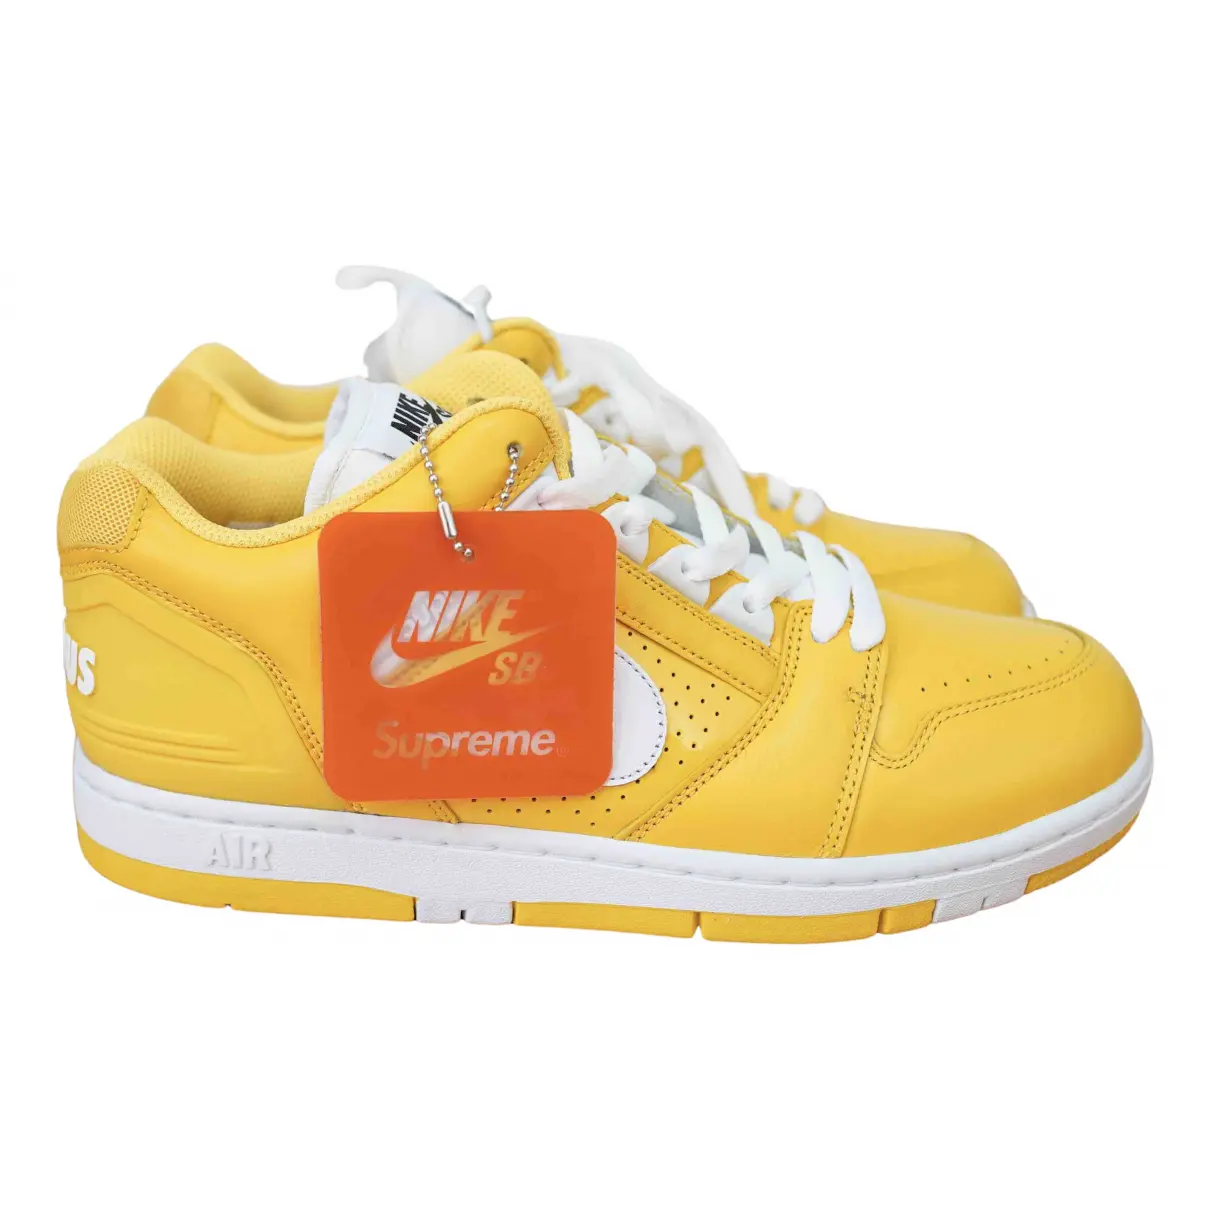 SB Air Force 2 Low leather low trainers Nike x Supreme